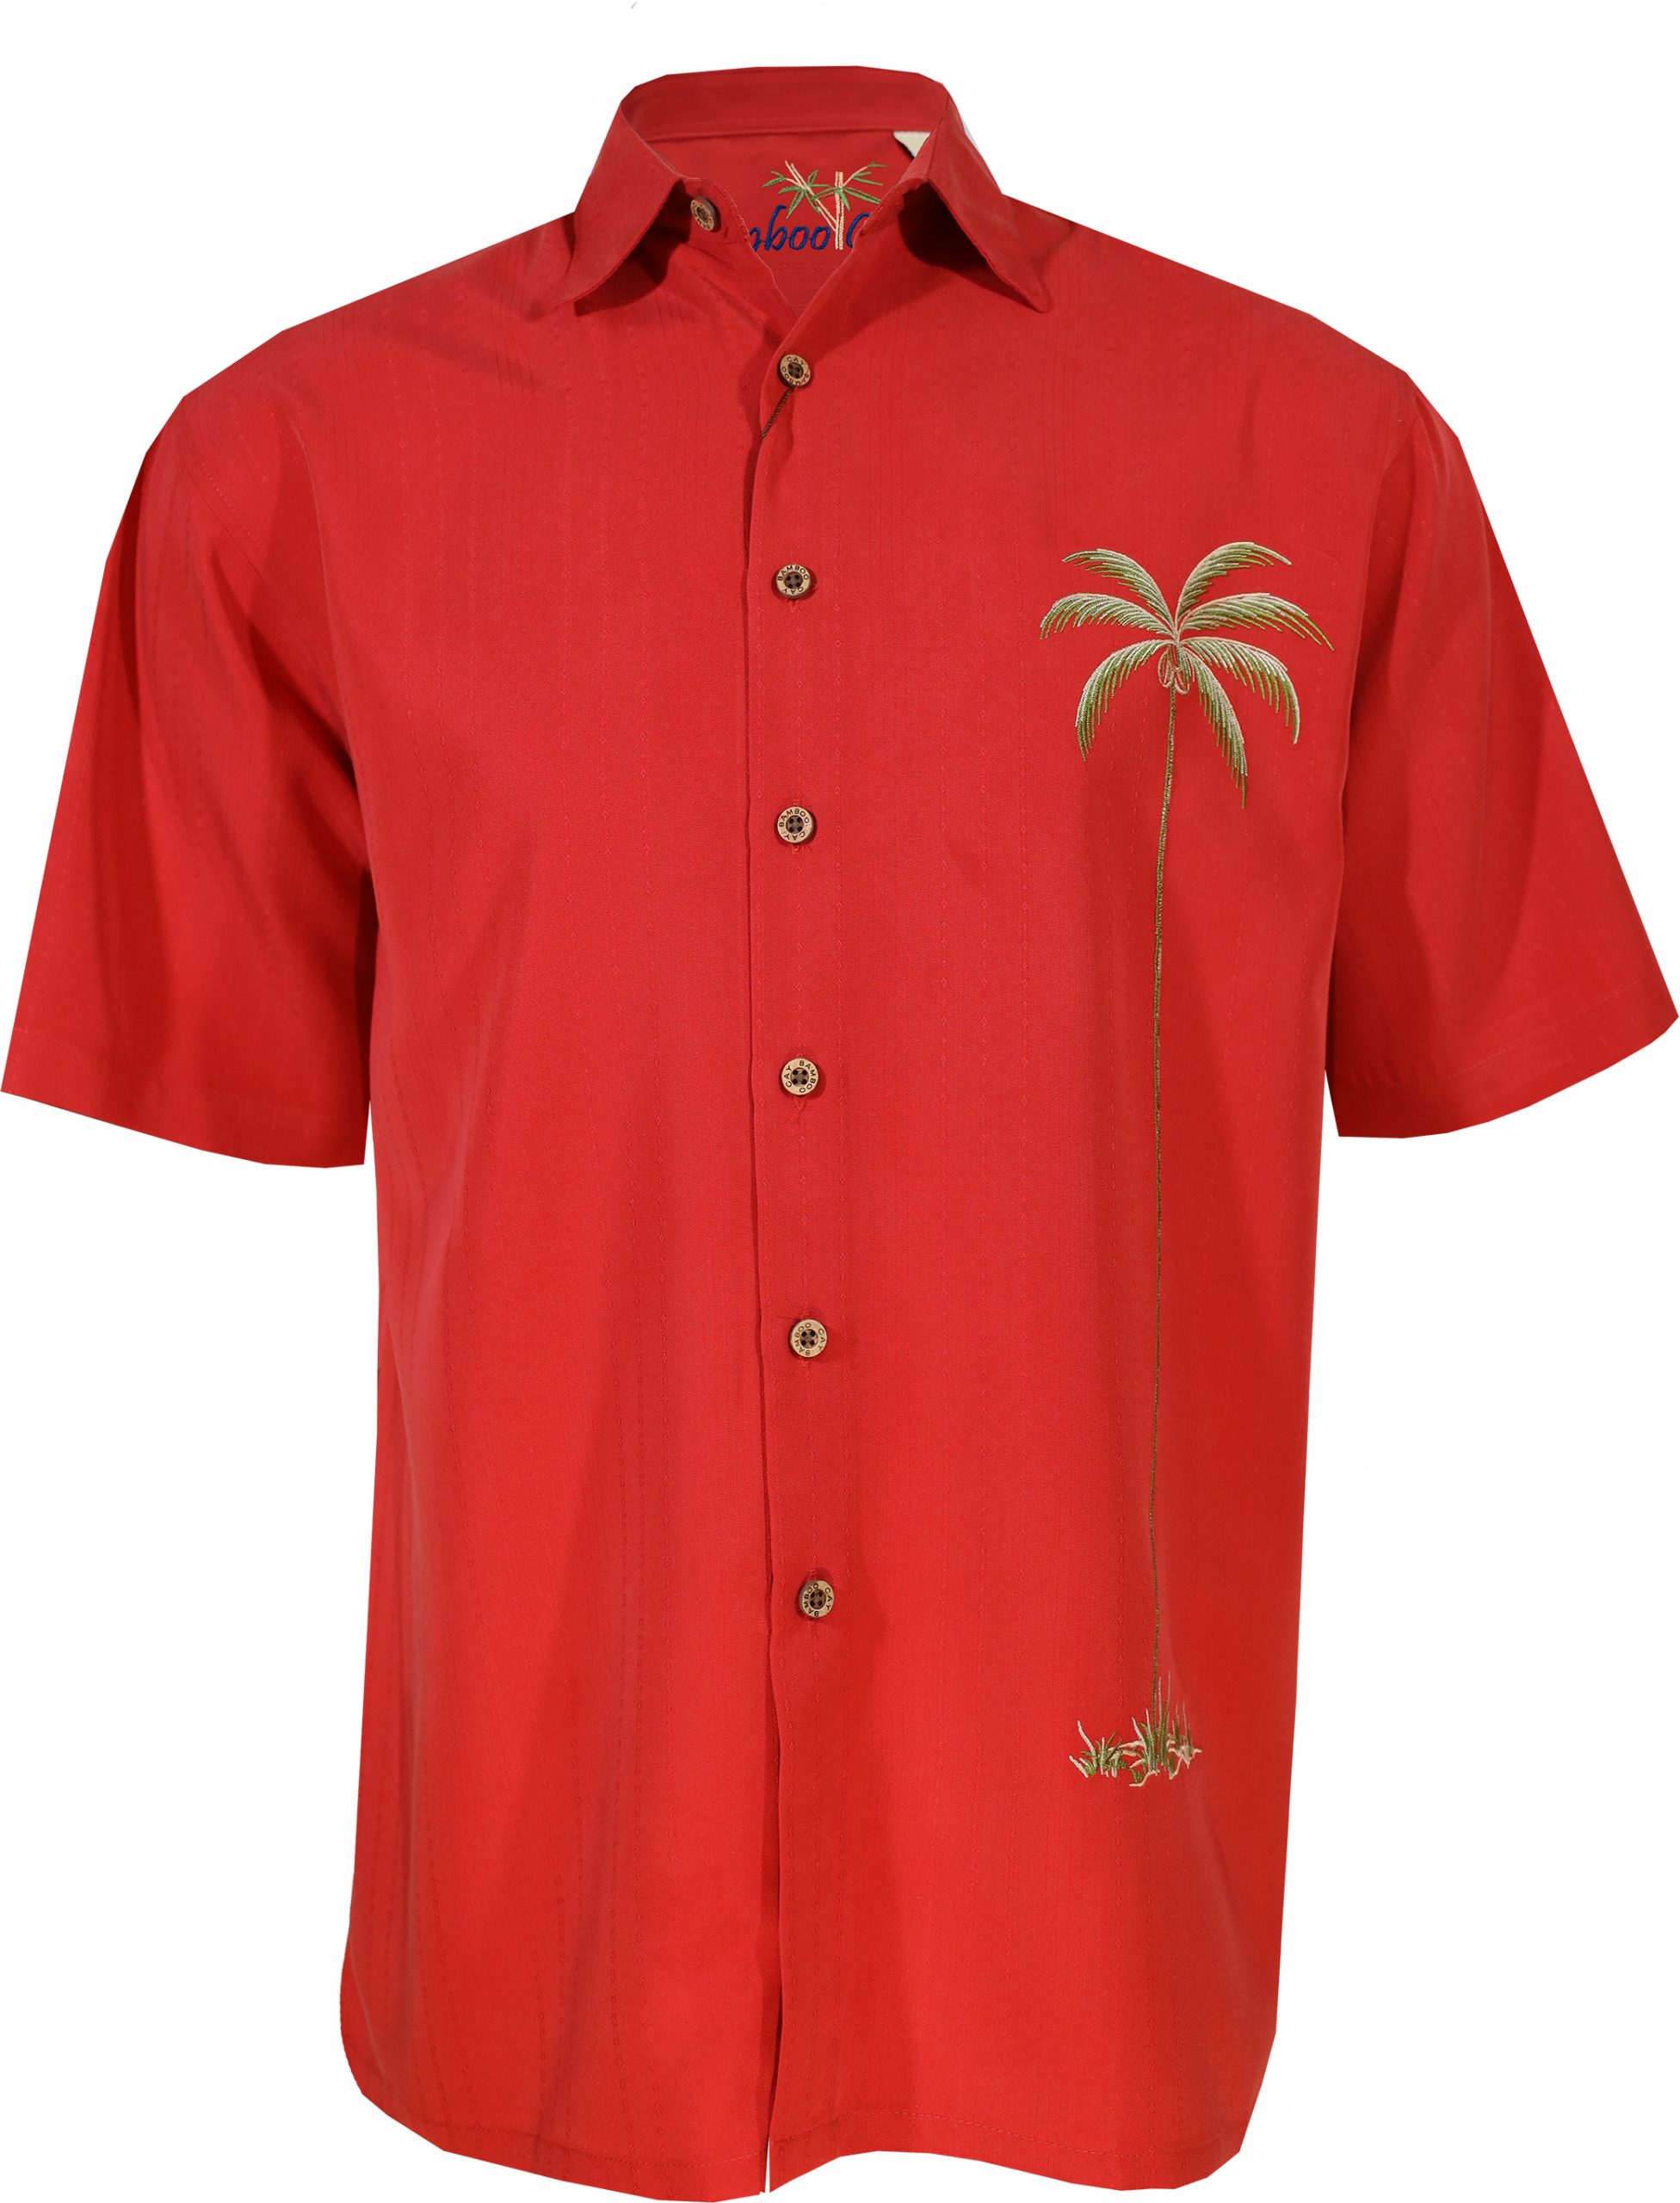 single palm embroidered bamboo cay shirts men